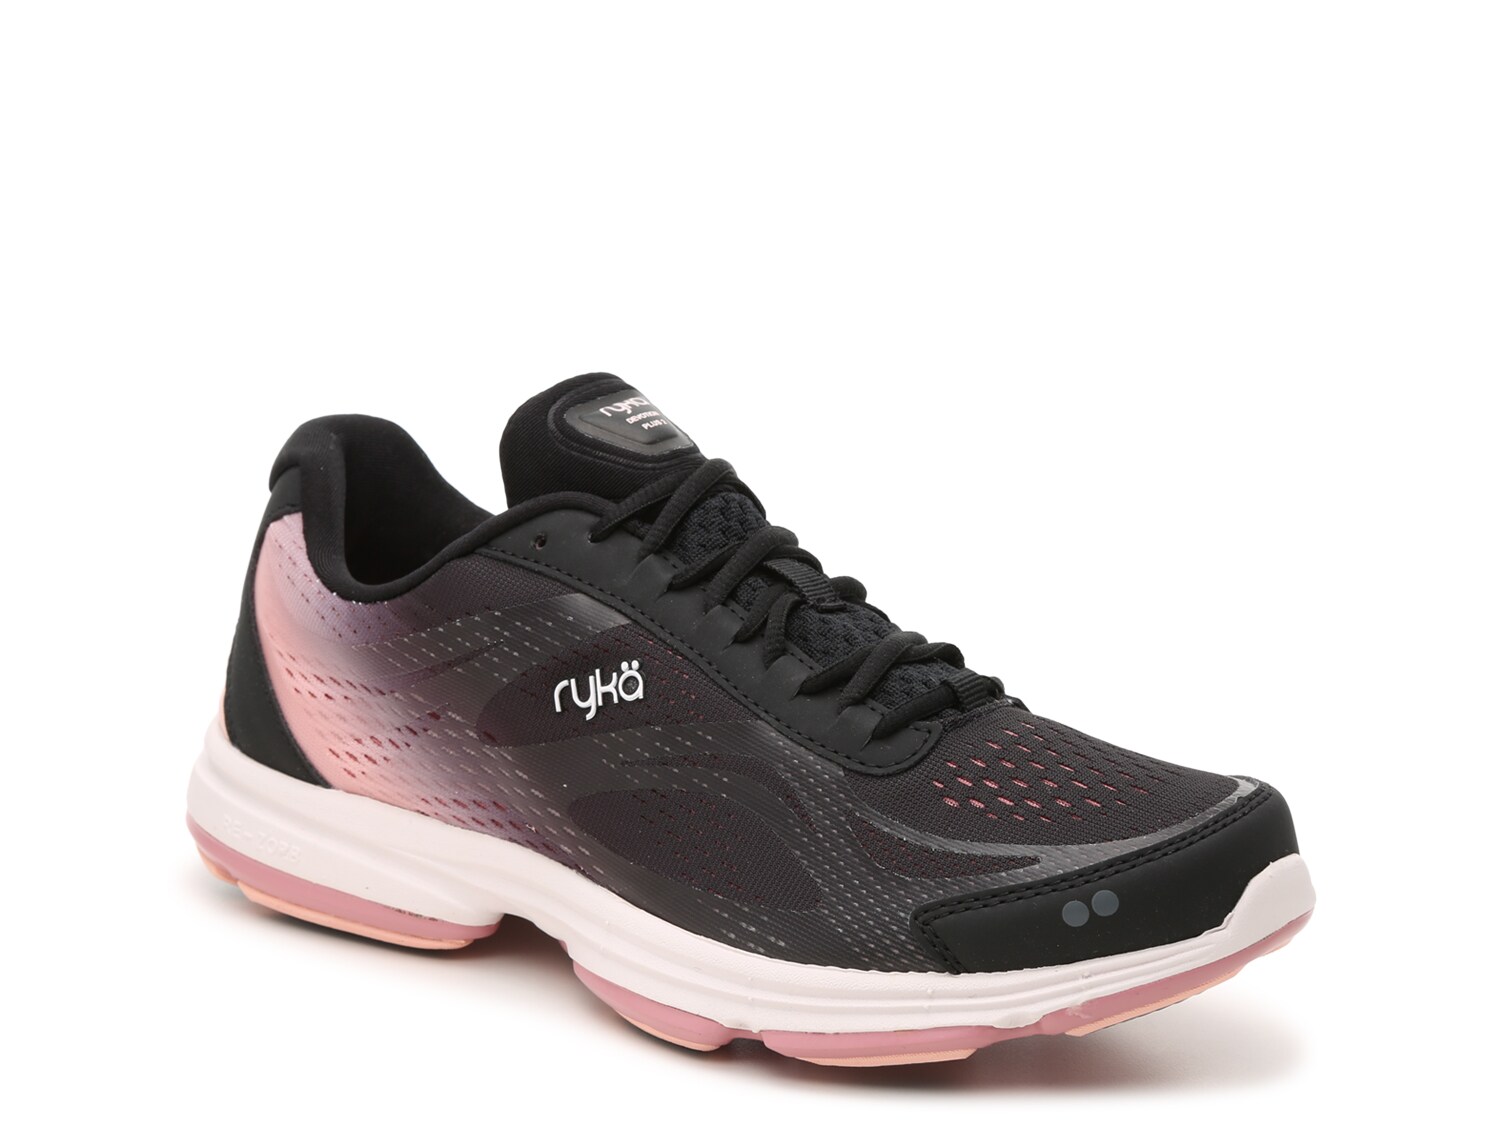 spring loaded athletic shoes